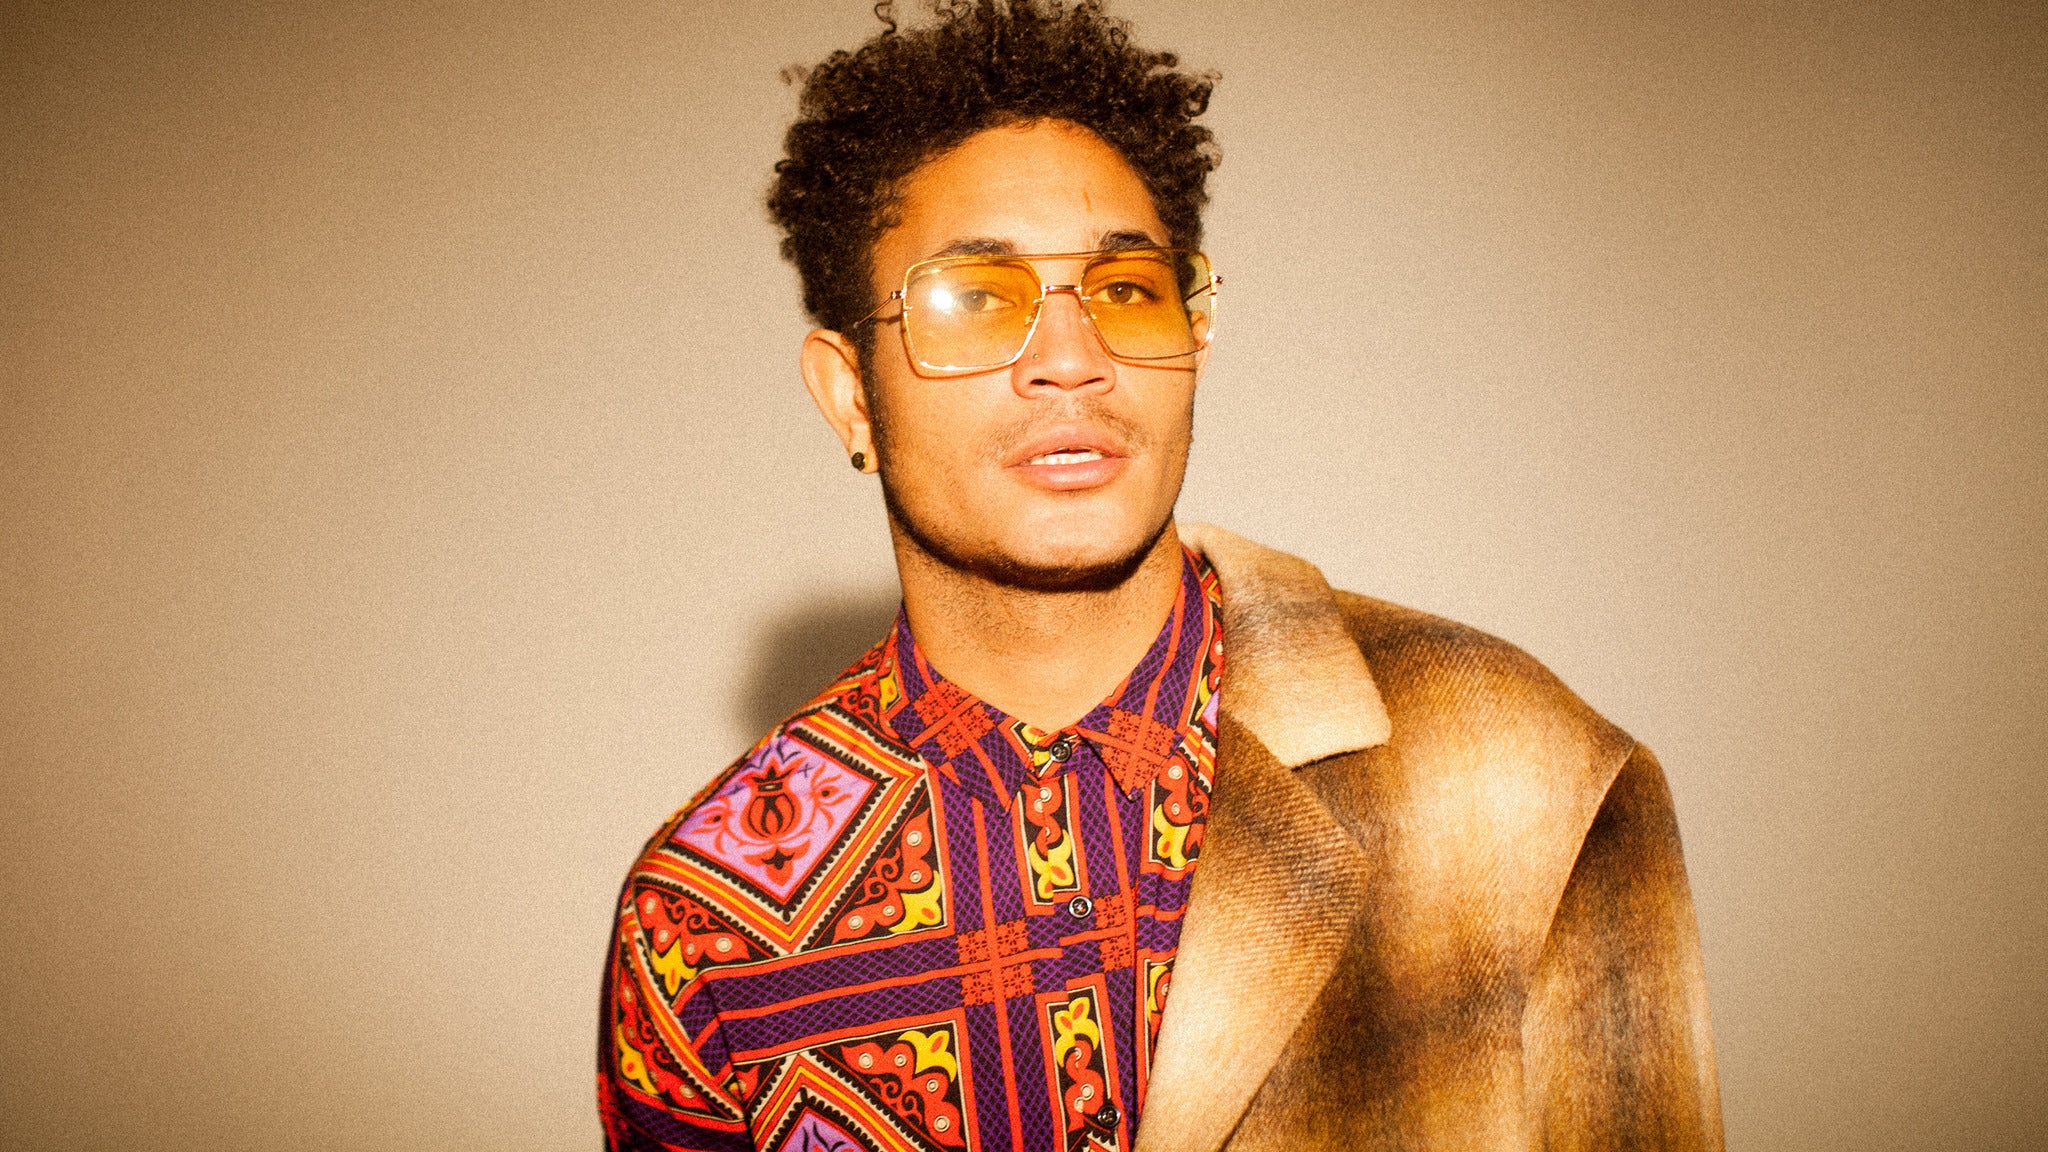 Bryce Vine in New York promo photo for Exclusive presale offer code